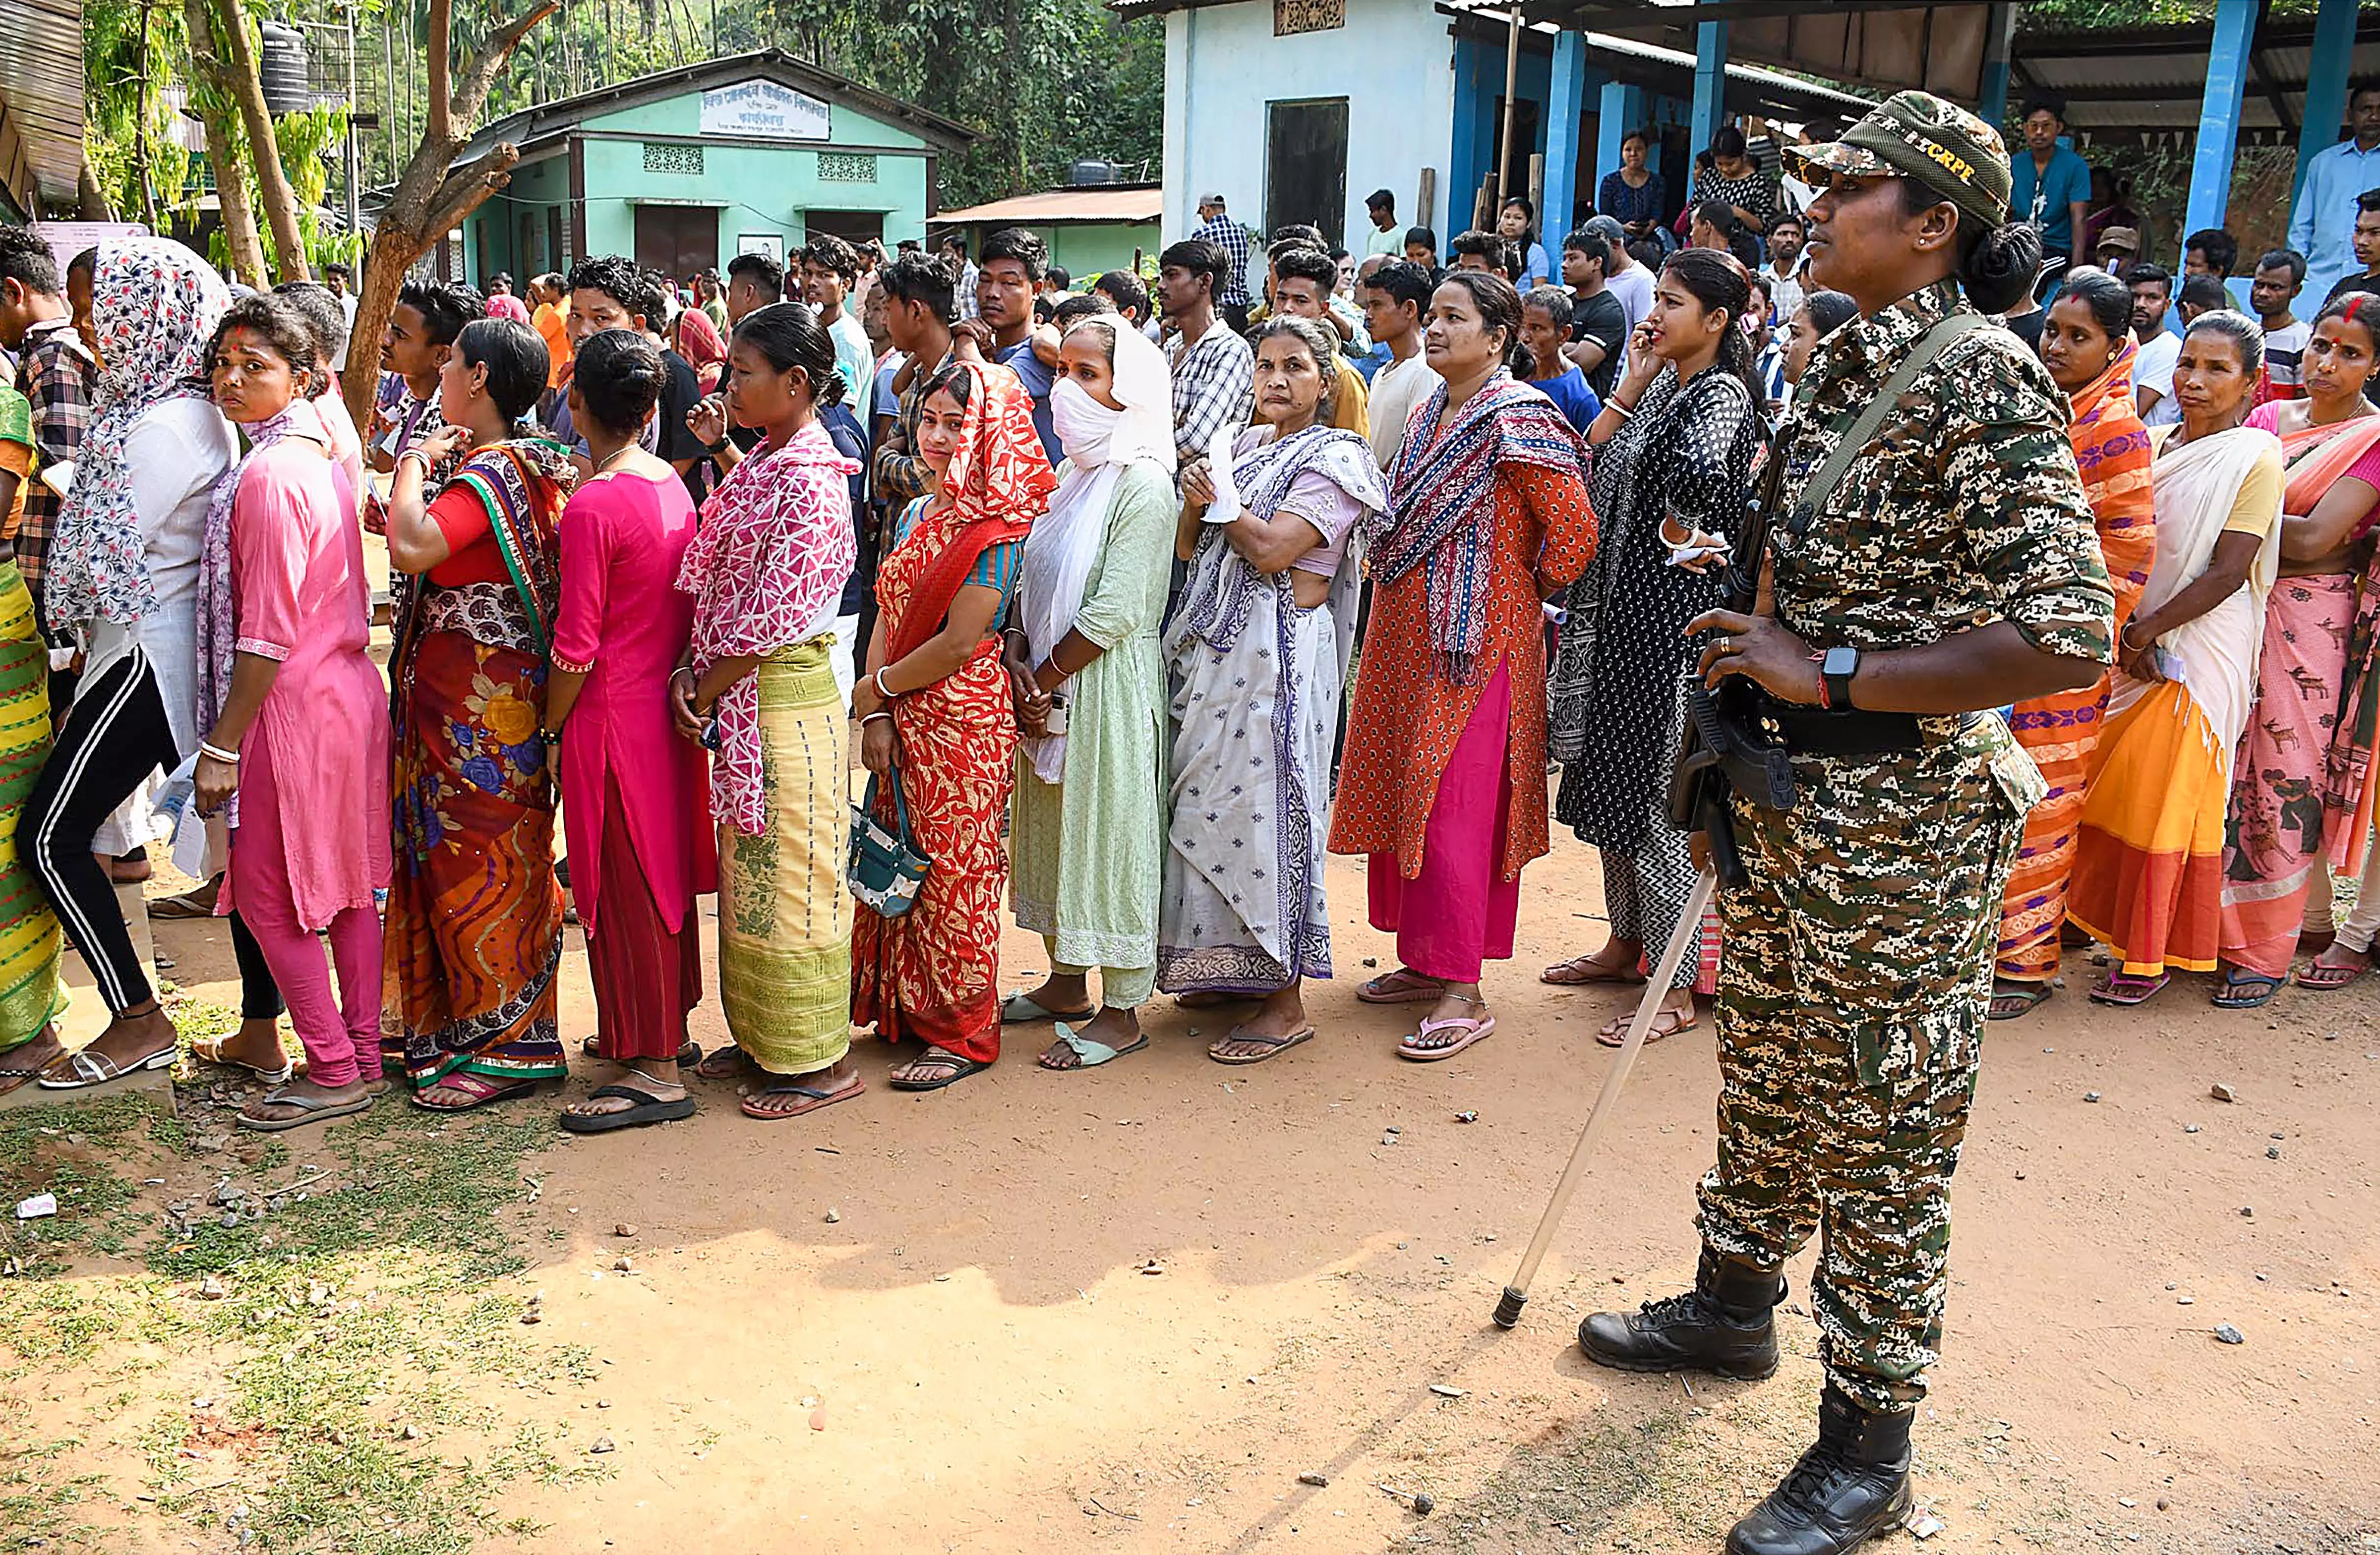 Third phase of polling in Bengal: Turnout of 77.53% recorded across 4 LS seats